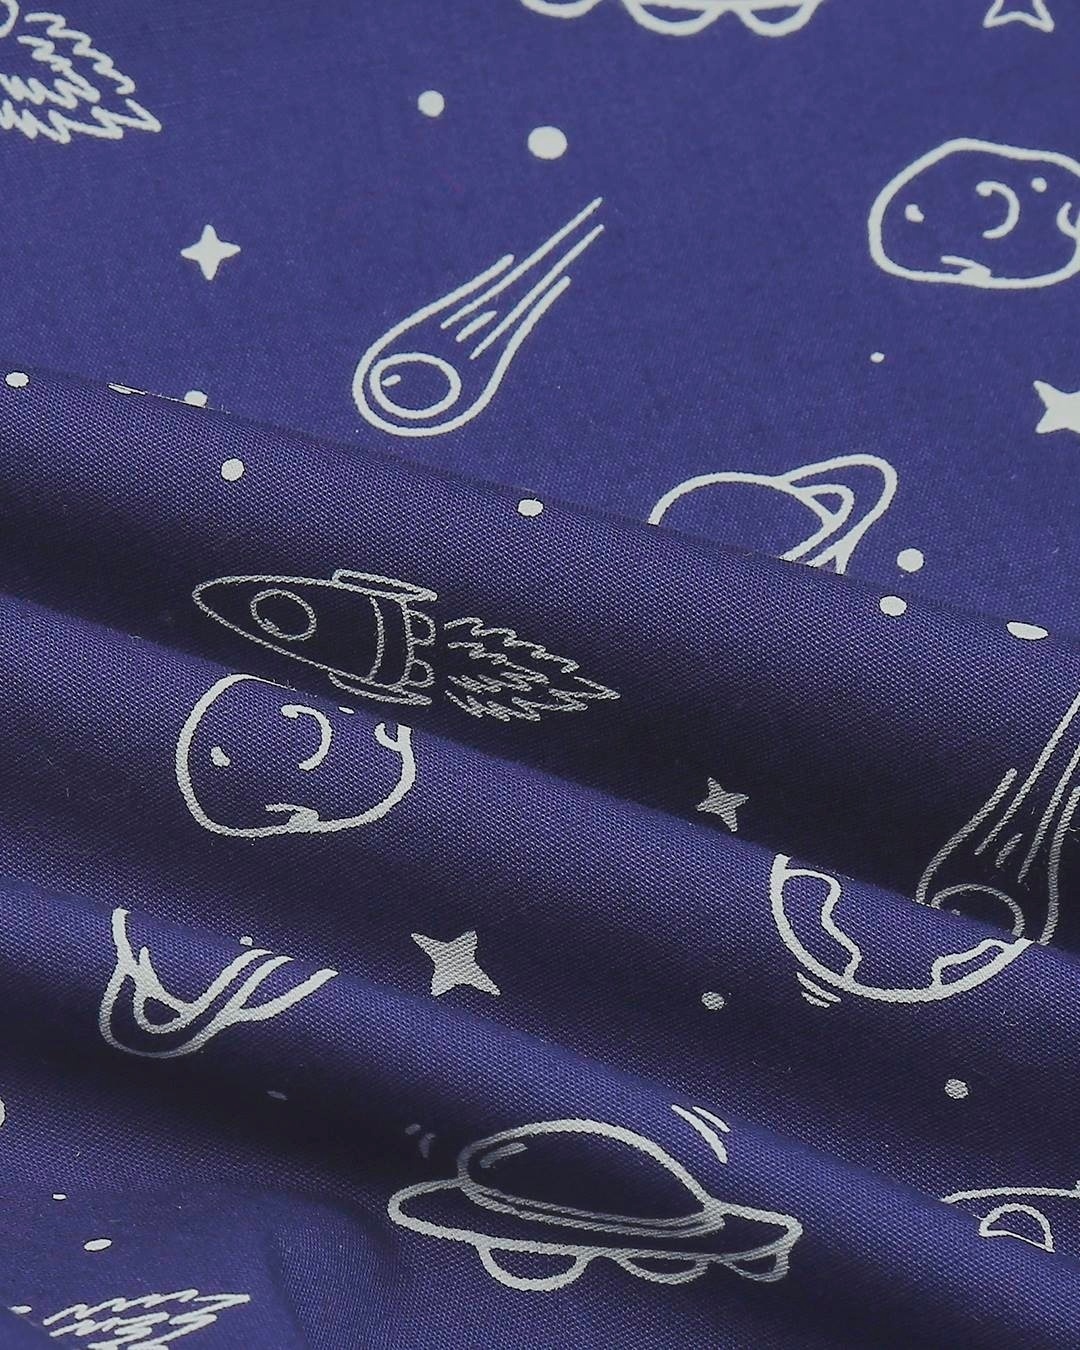 Shop Outer Space All Over Printed Pyjama